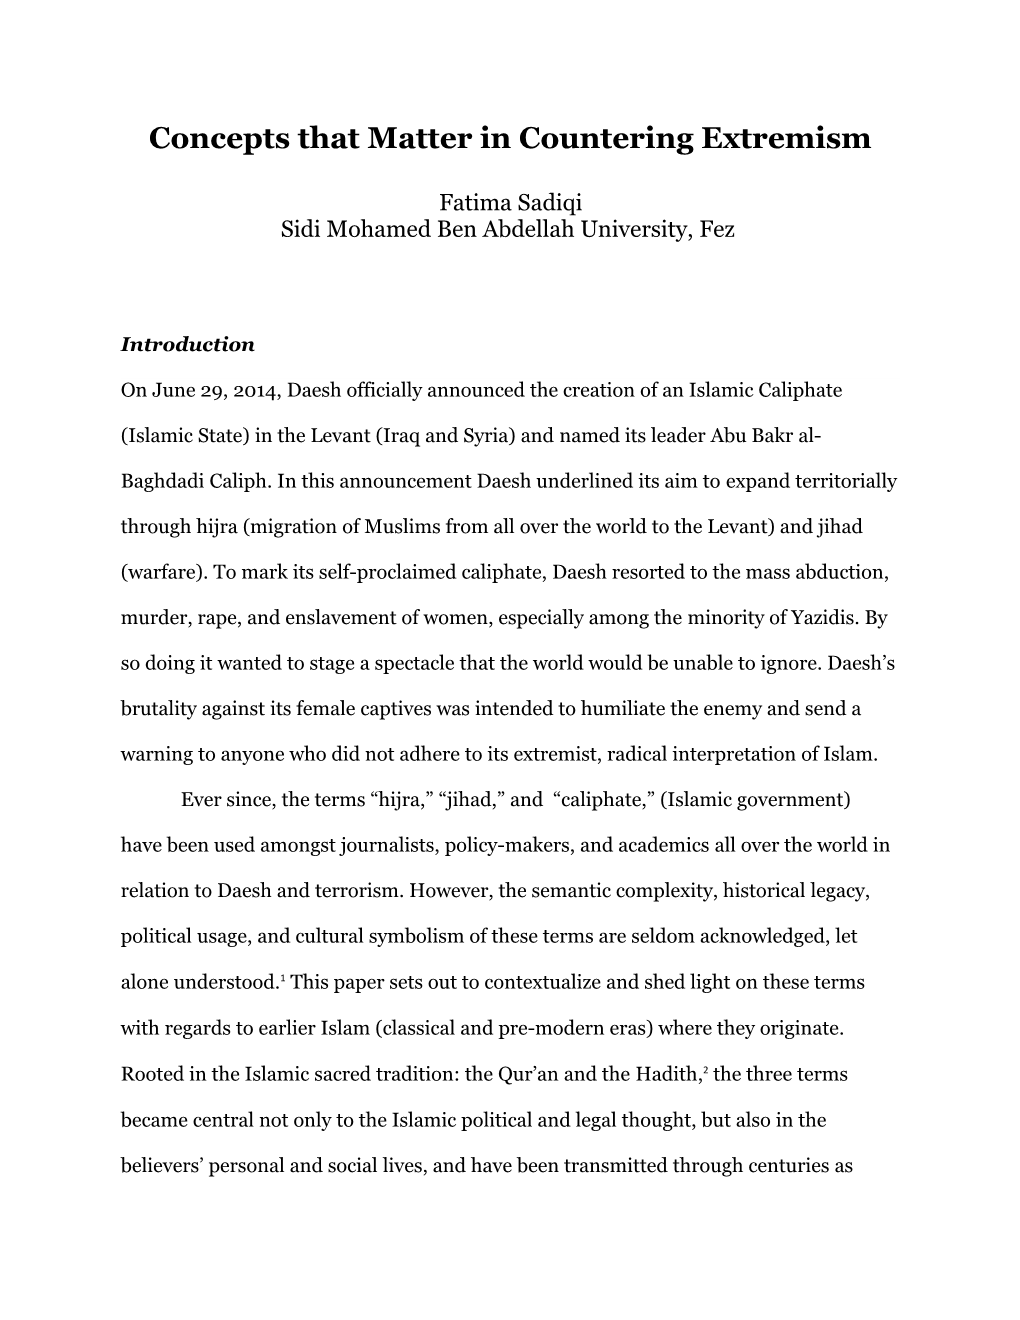 The Terms Jihadism and Daesh : the Hijacking of Hijra, Jihad, and Caliphate in the Twenty-First